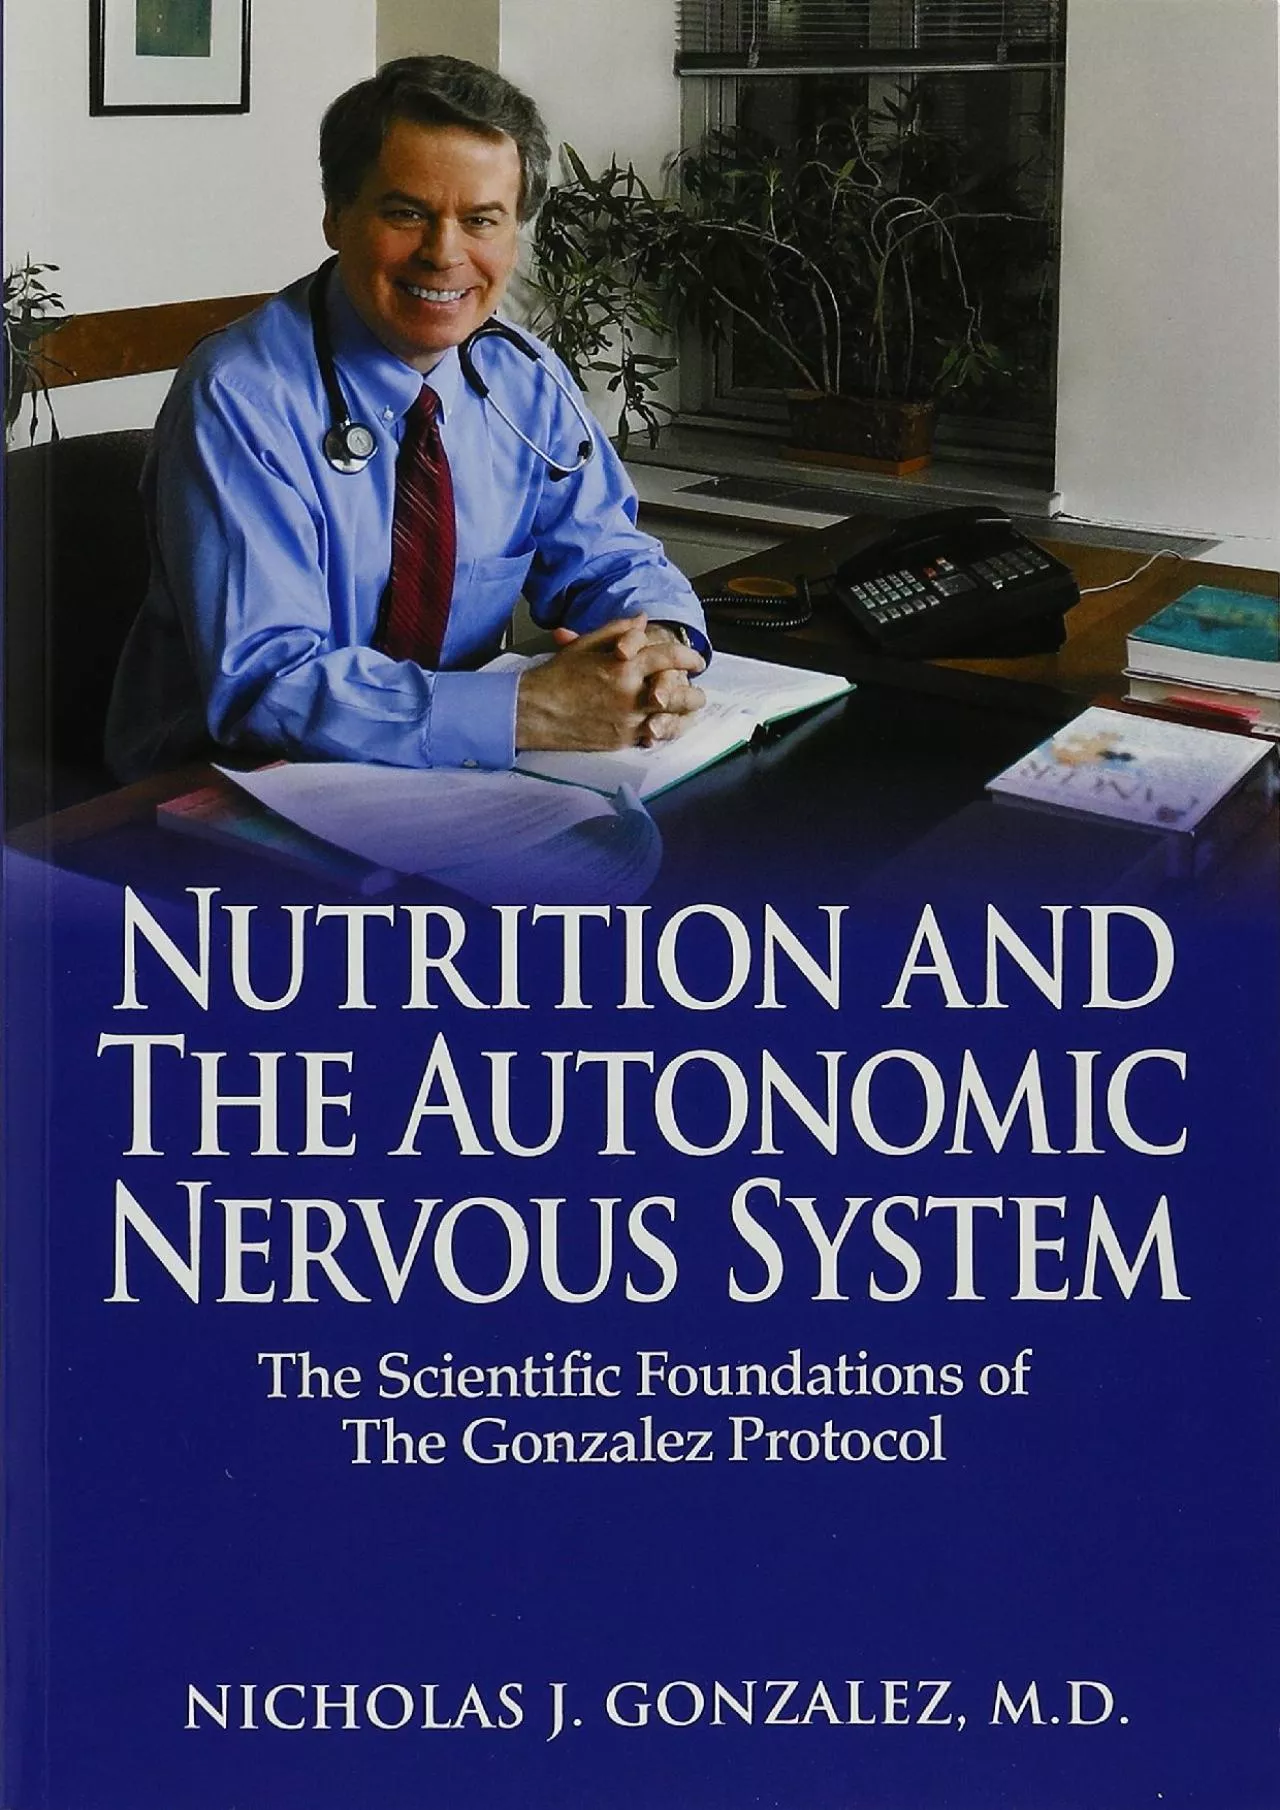 (BOOK)-Nutrition and the Autonomic Nervous System: The Scientific Foundations of the Gonzalez